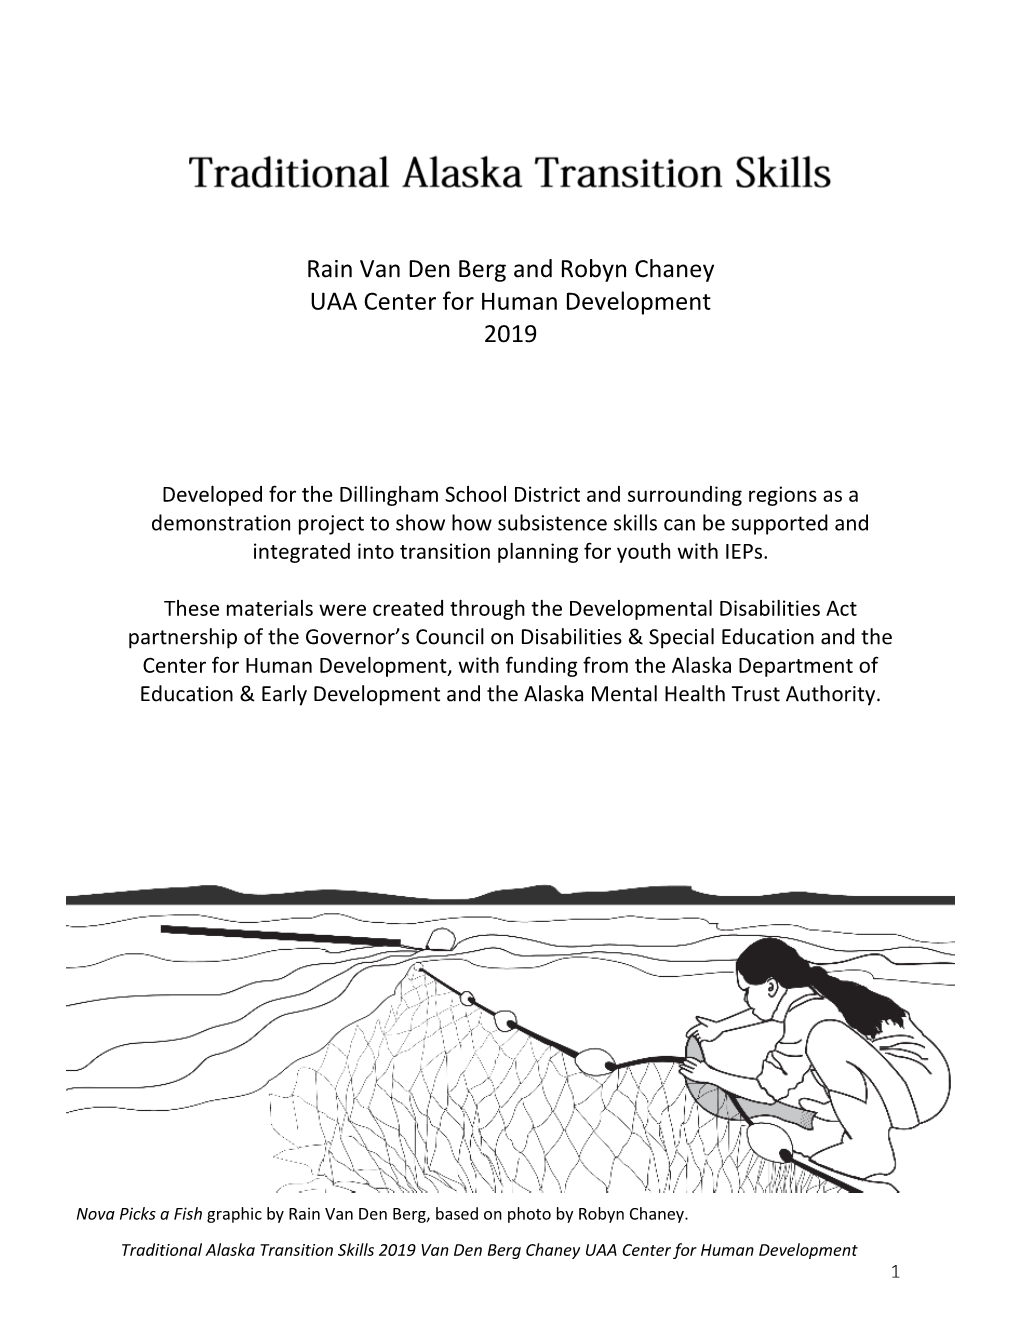 Traditional Alaska Transition Skills 2019 Van Den Berg Chaney UAA Center for Human Development 1 Welcome by Robyn Chaney